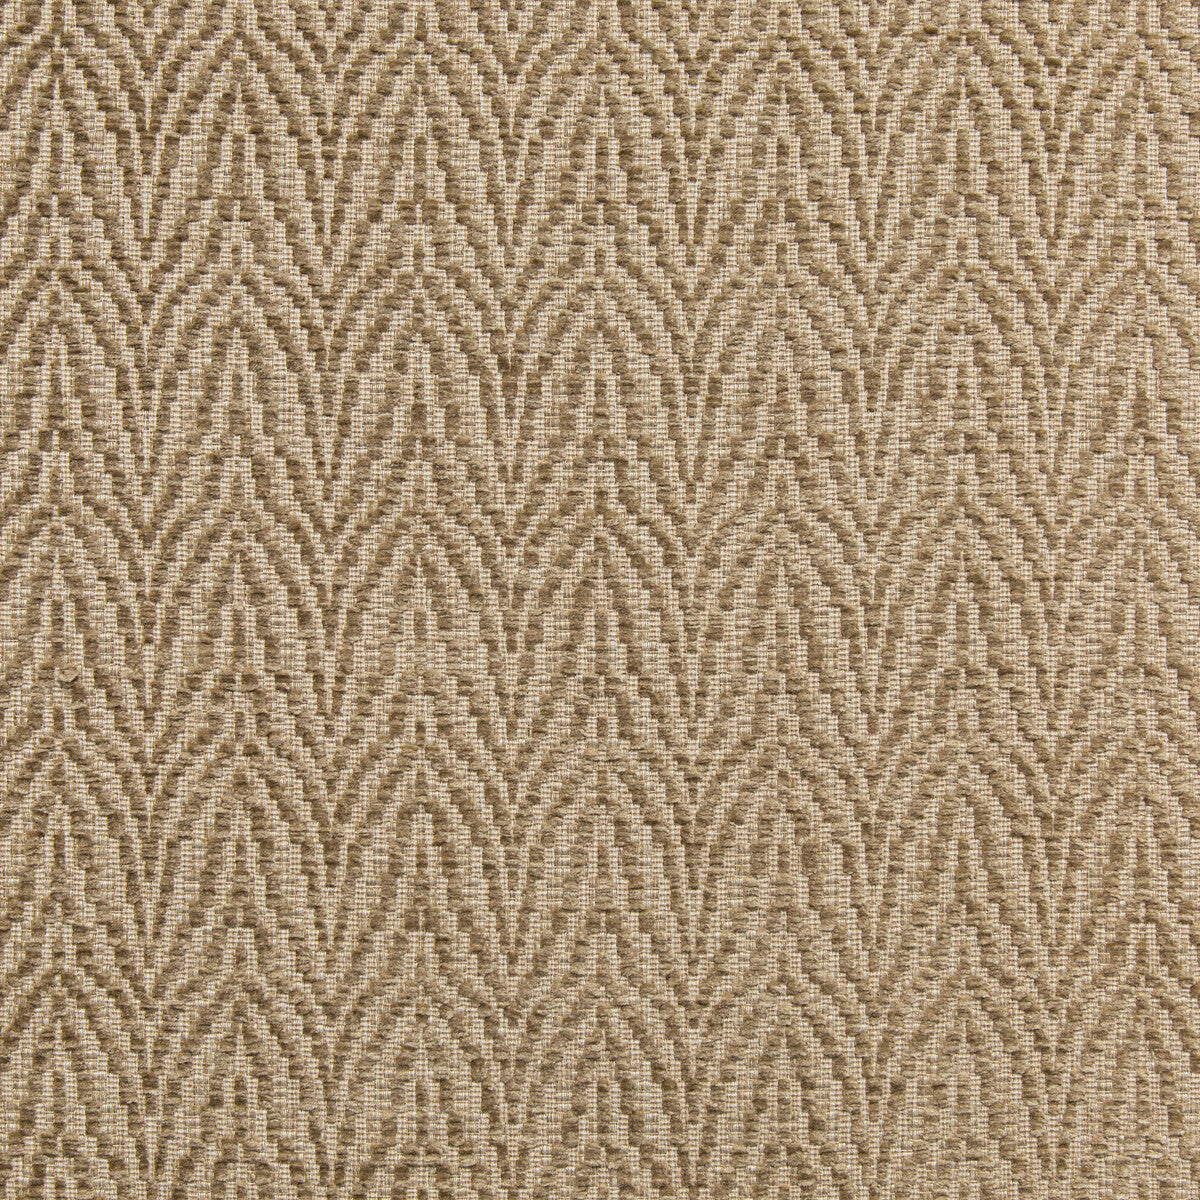 Blyth Weave fabric in straw color - pattern 2020108.164.0 - by Lee Jofa in the Linford Weaves collection